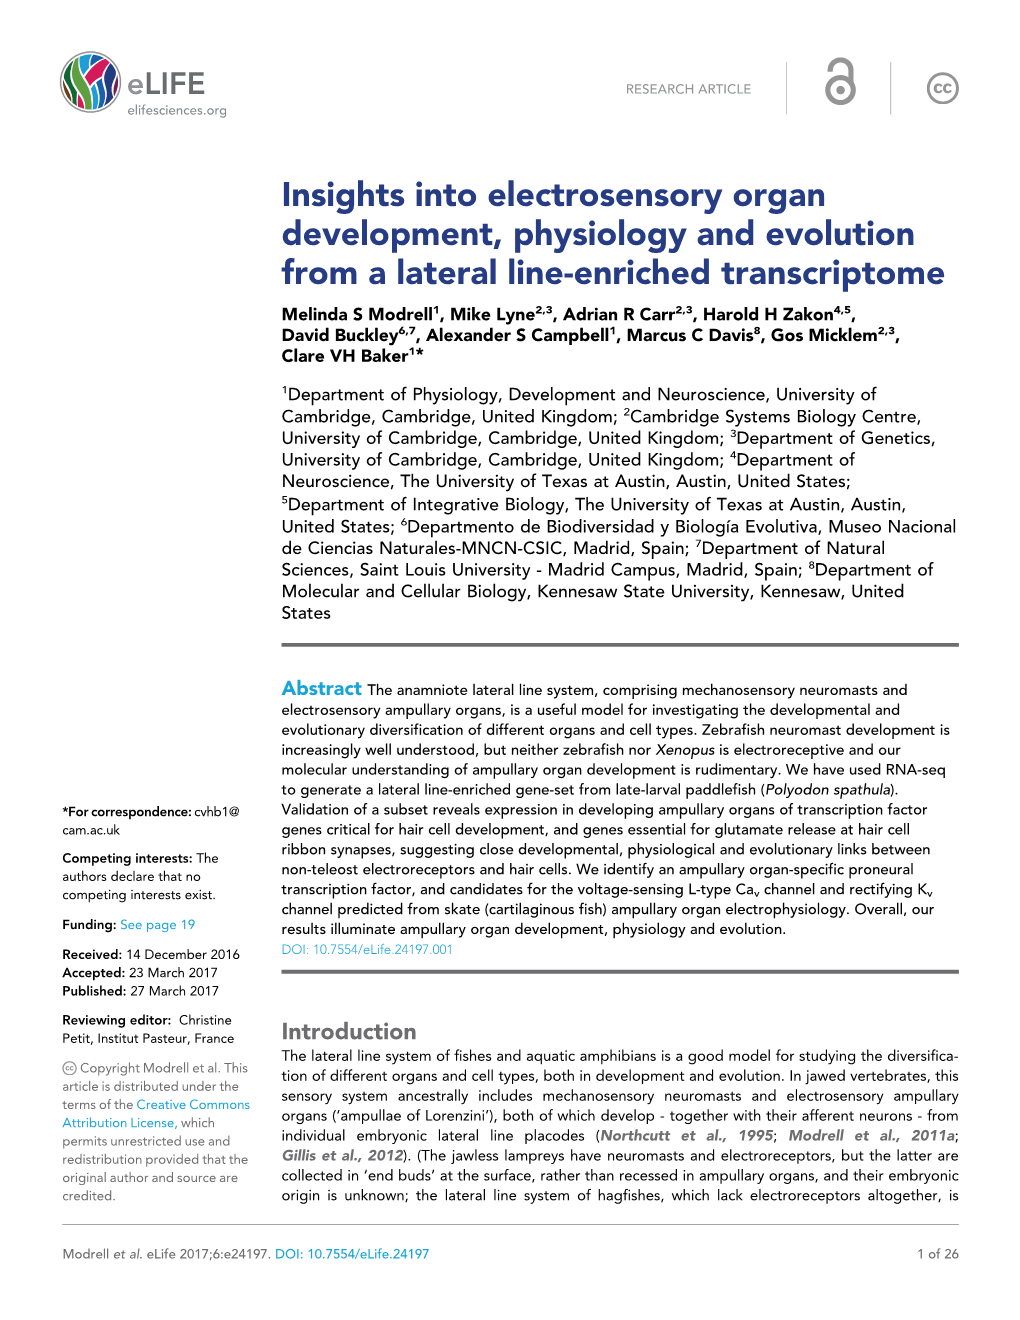 Insights Into Electrosensory Organ Development, Physiology And